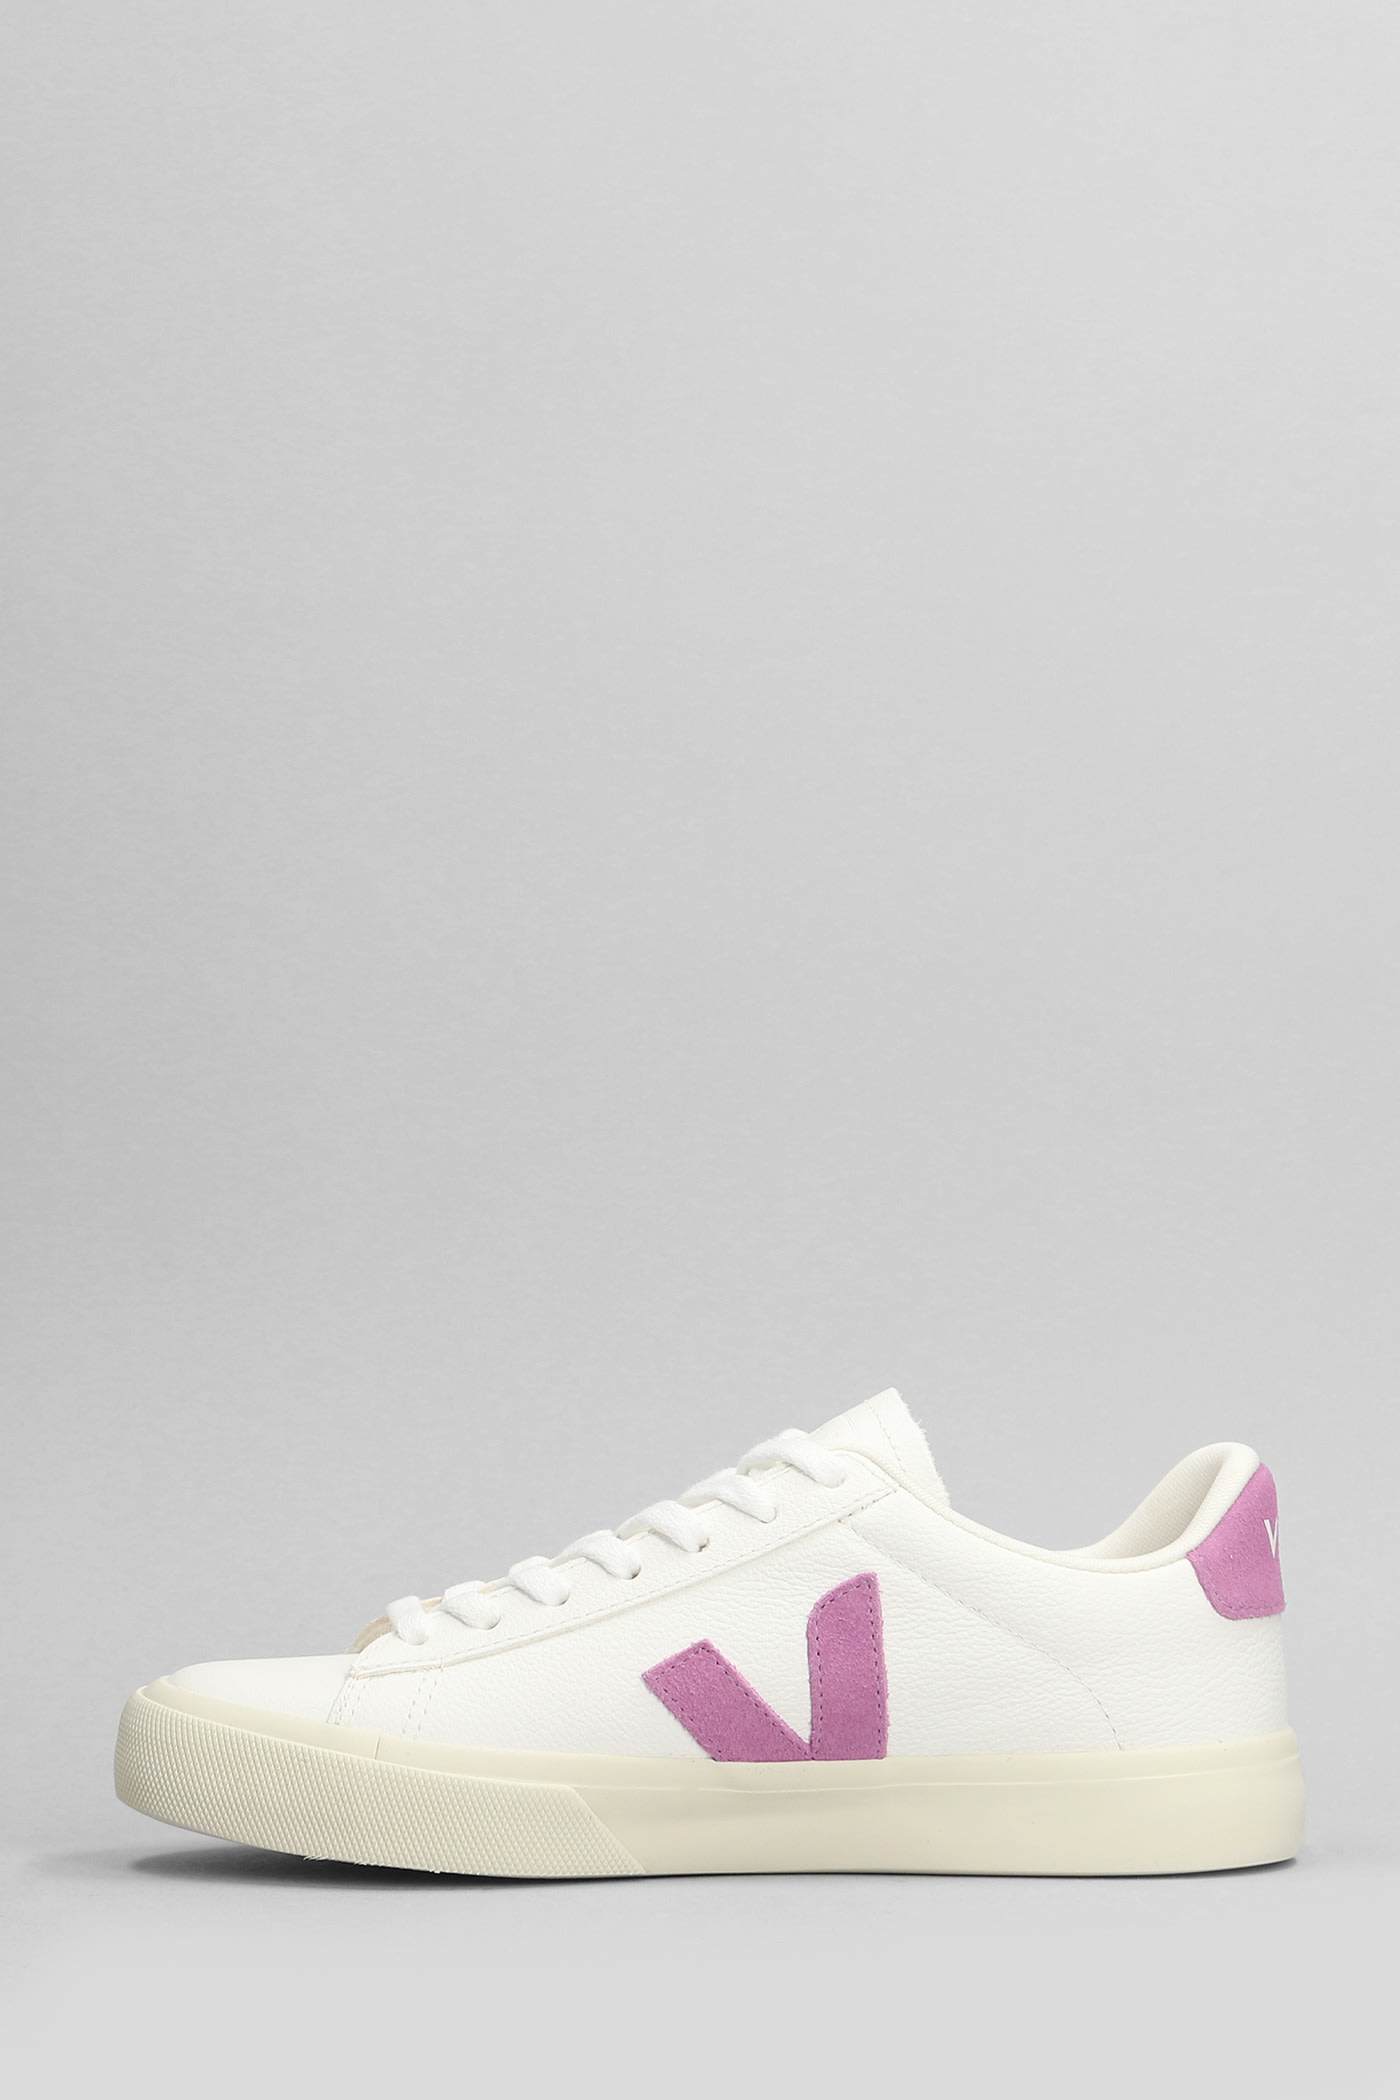 Shop Veja Campo Sneakers In White Leather